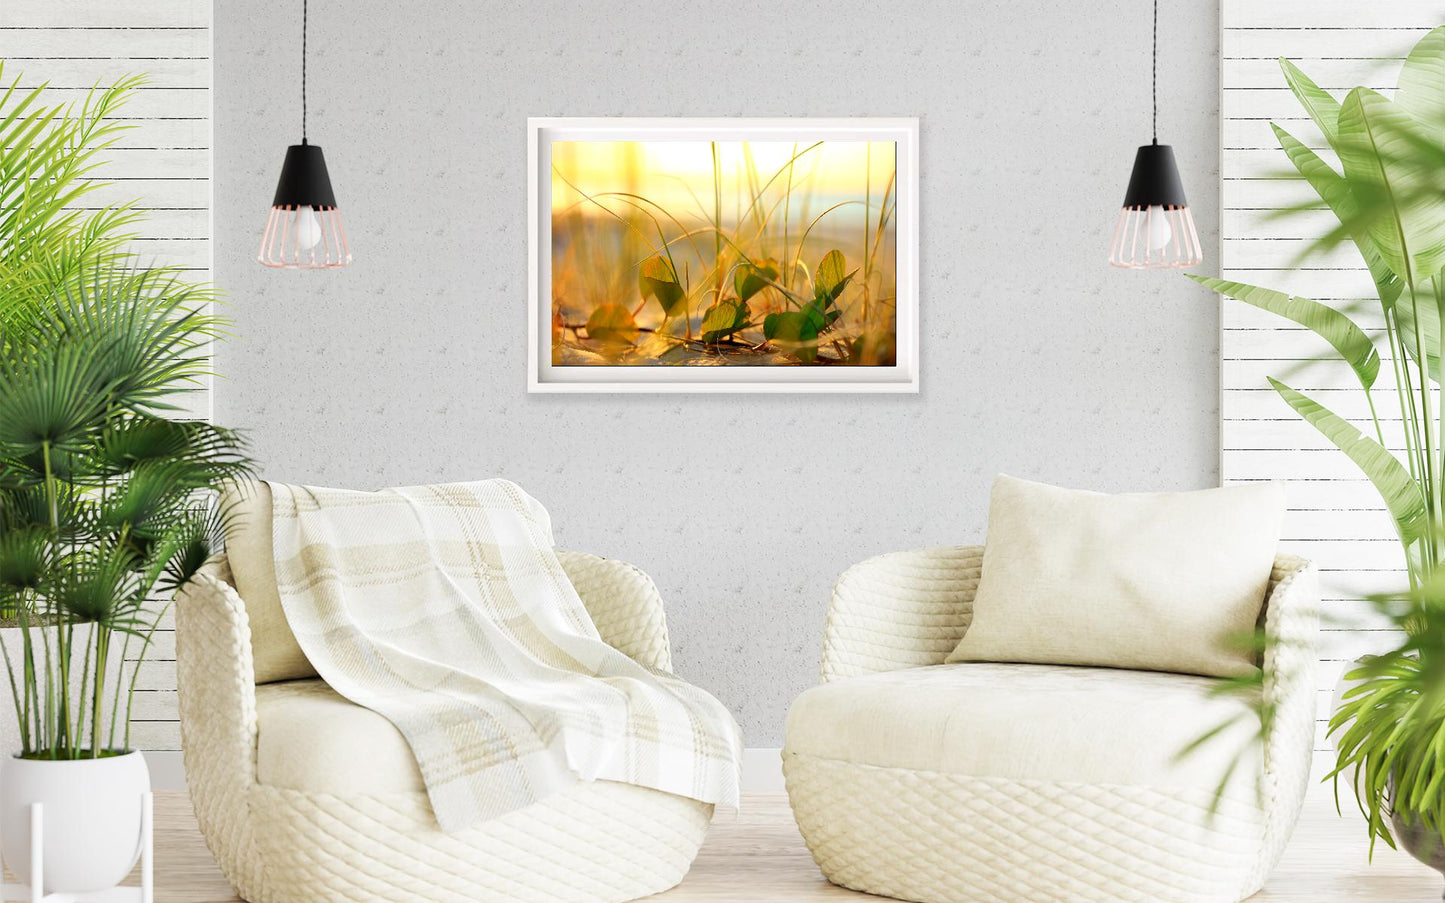 Image 19 - Seagrass-frame-2